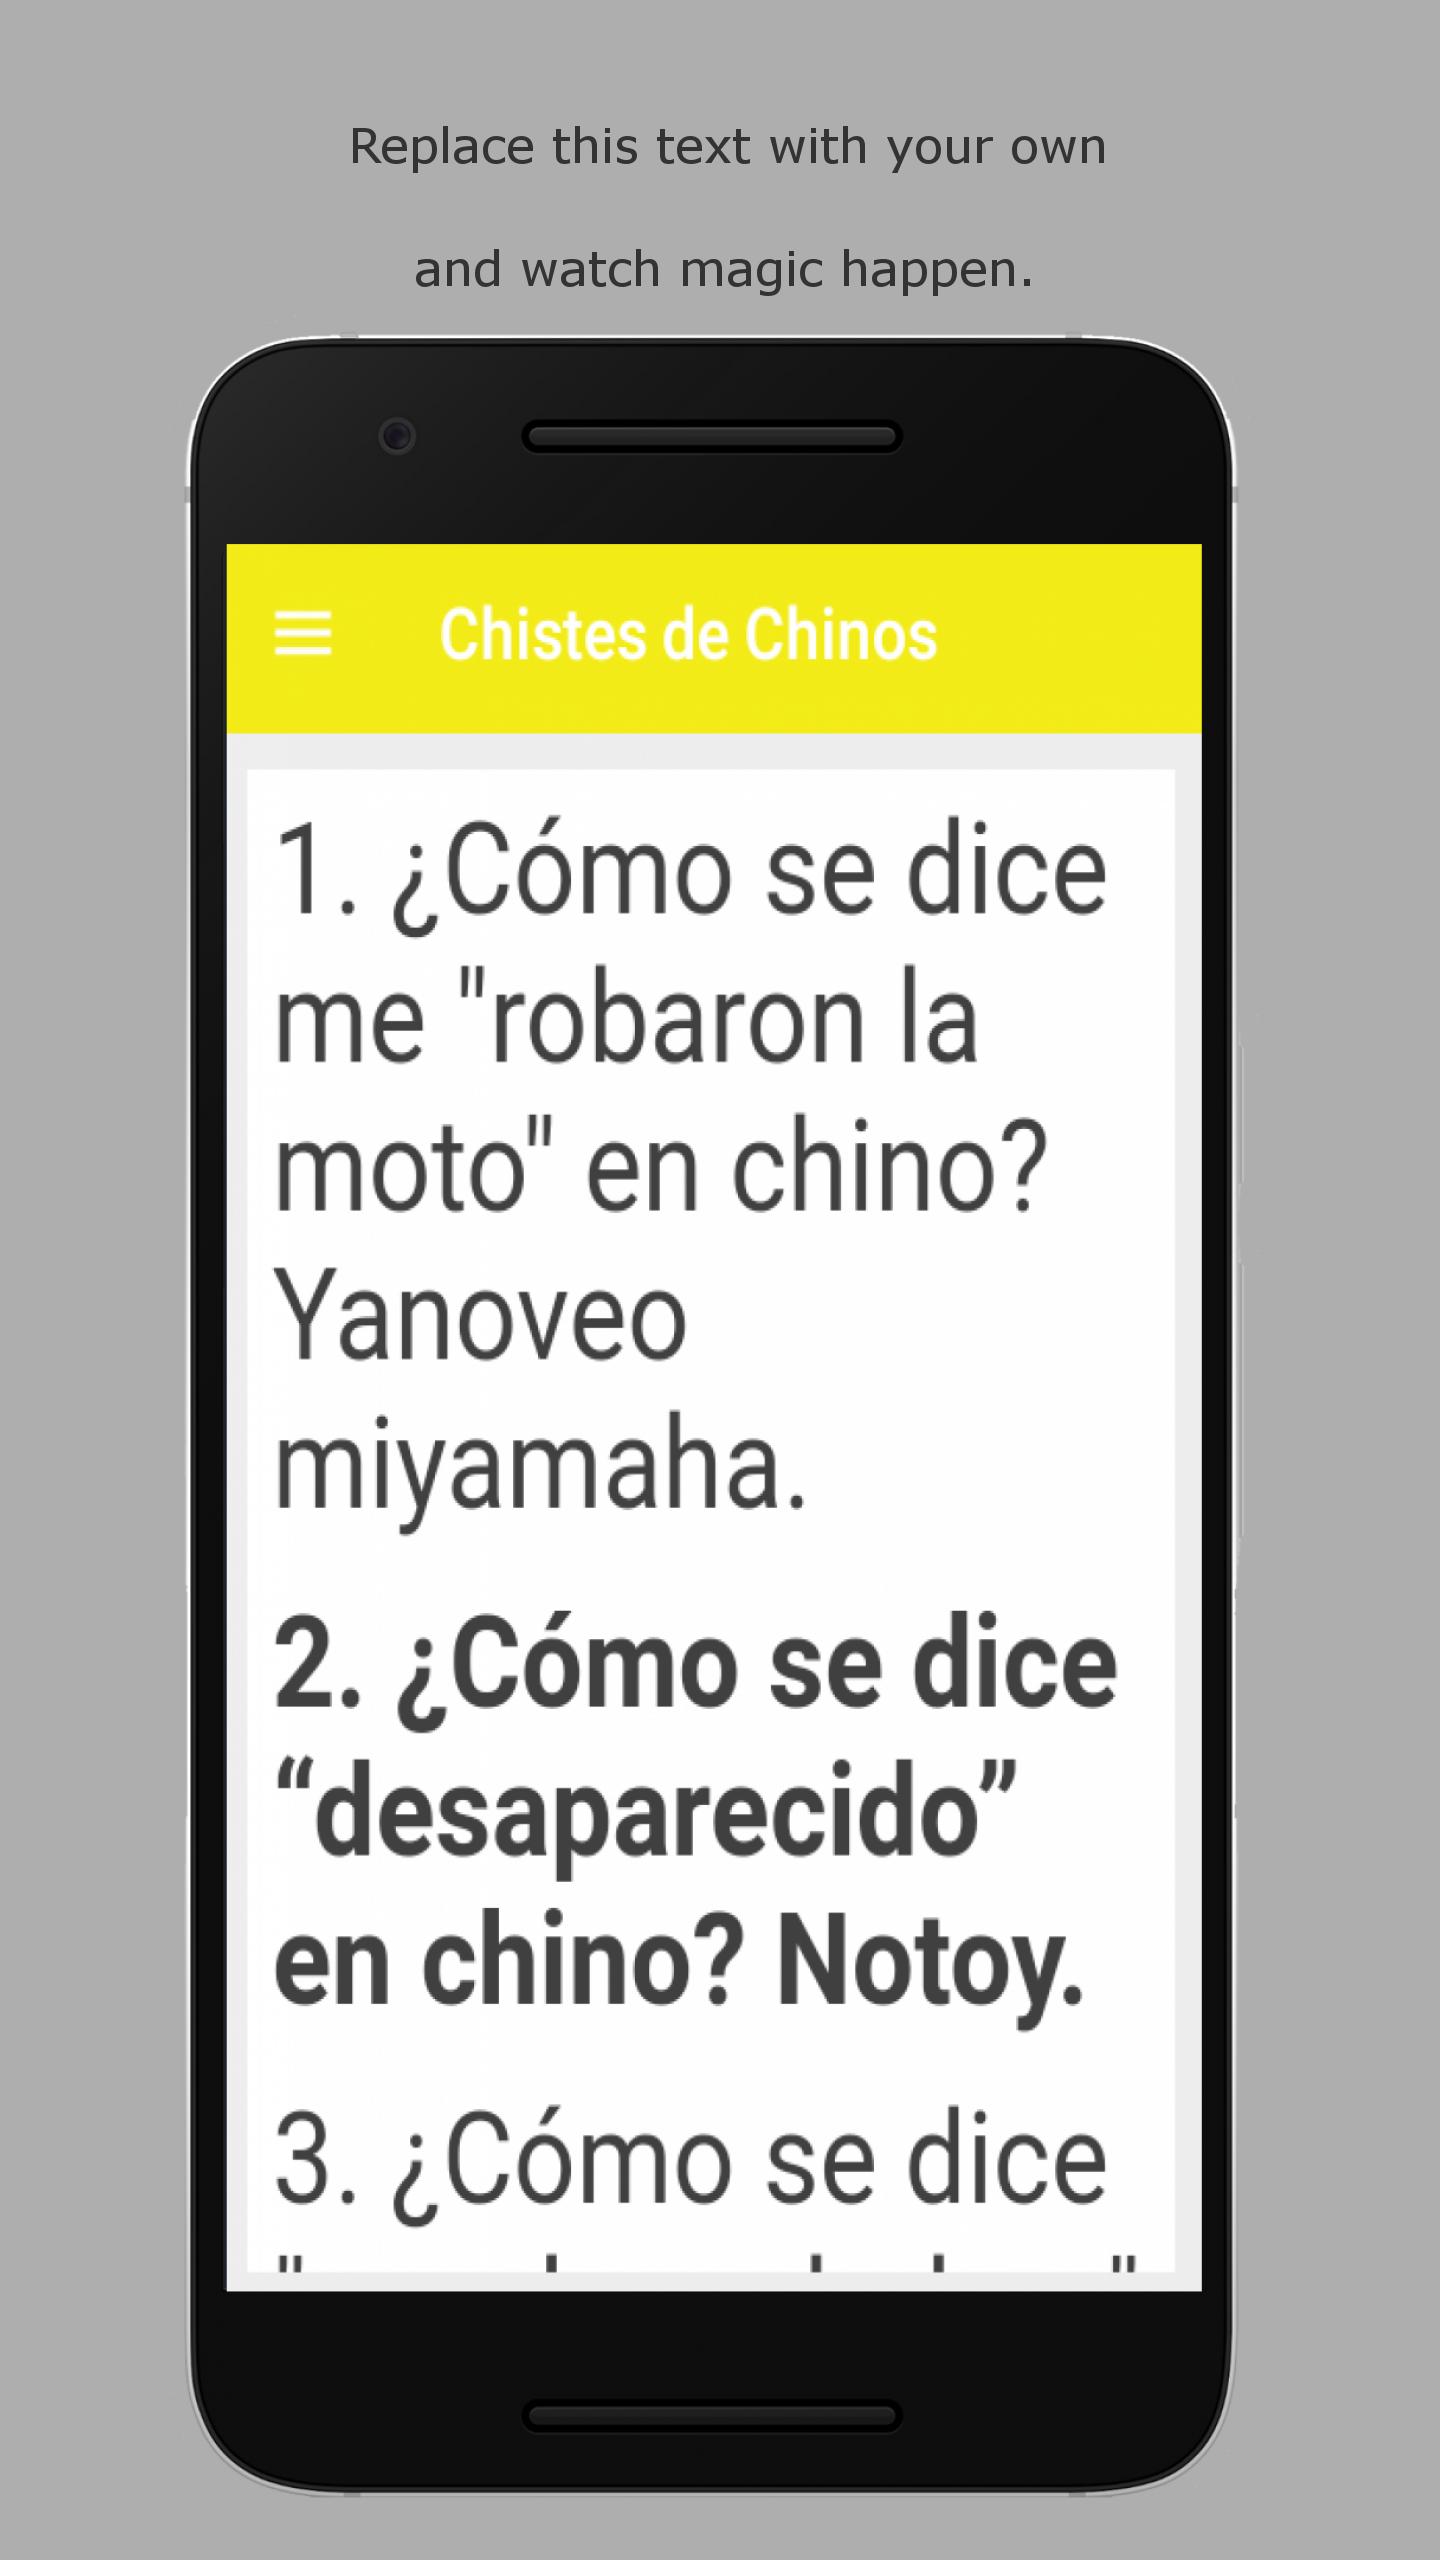 Chistes Gratis Cortos for Android - APK Download